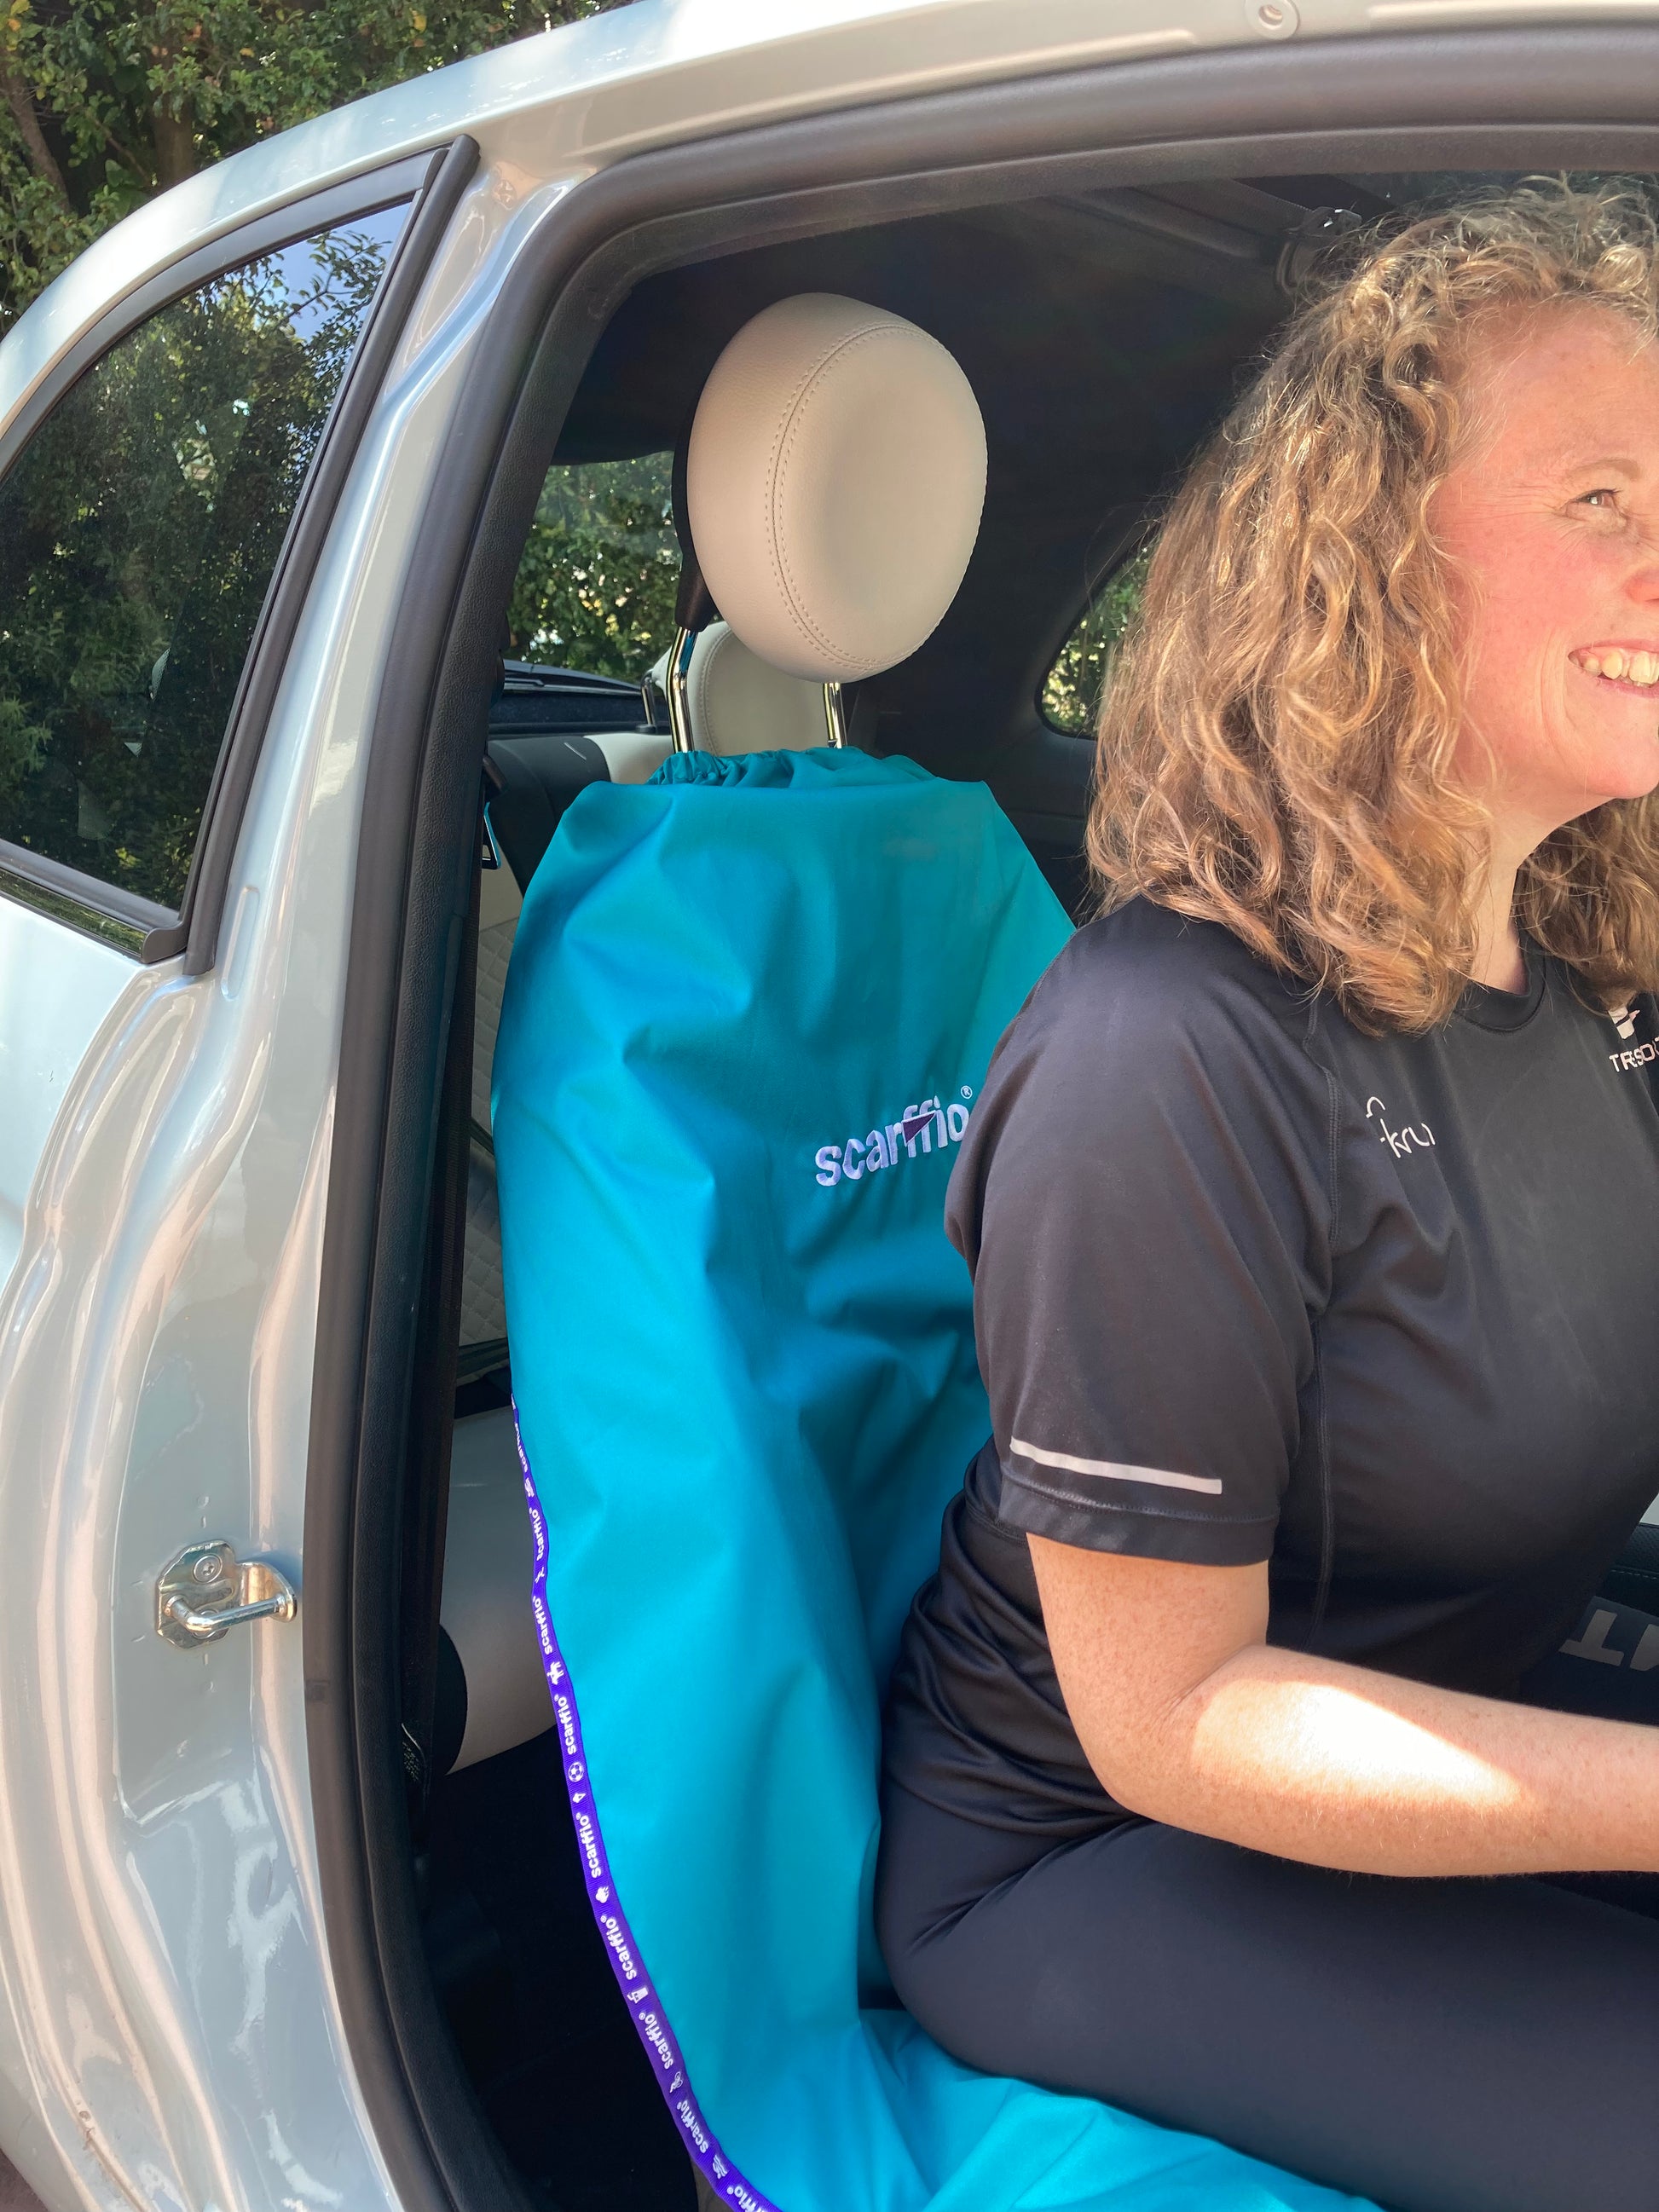 This image shows at the interior of a Fiat 500, with a Hero scarffio® down on the drivers seat , with a smiling female driver in situ. The Hero scarffio® has a Wild Teal base fabric with contrasting purple edging , and a contrasting purple cape on the embroidered central logo.  